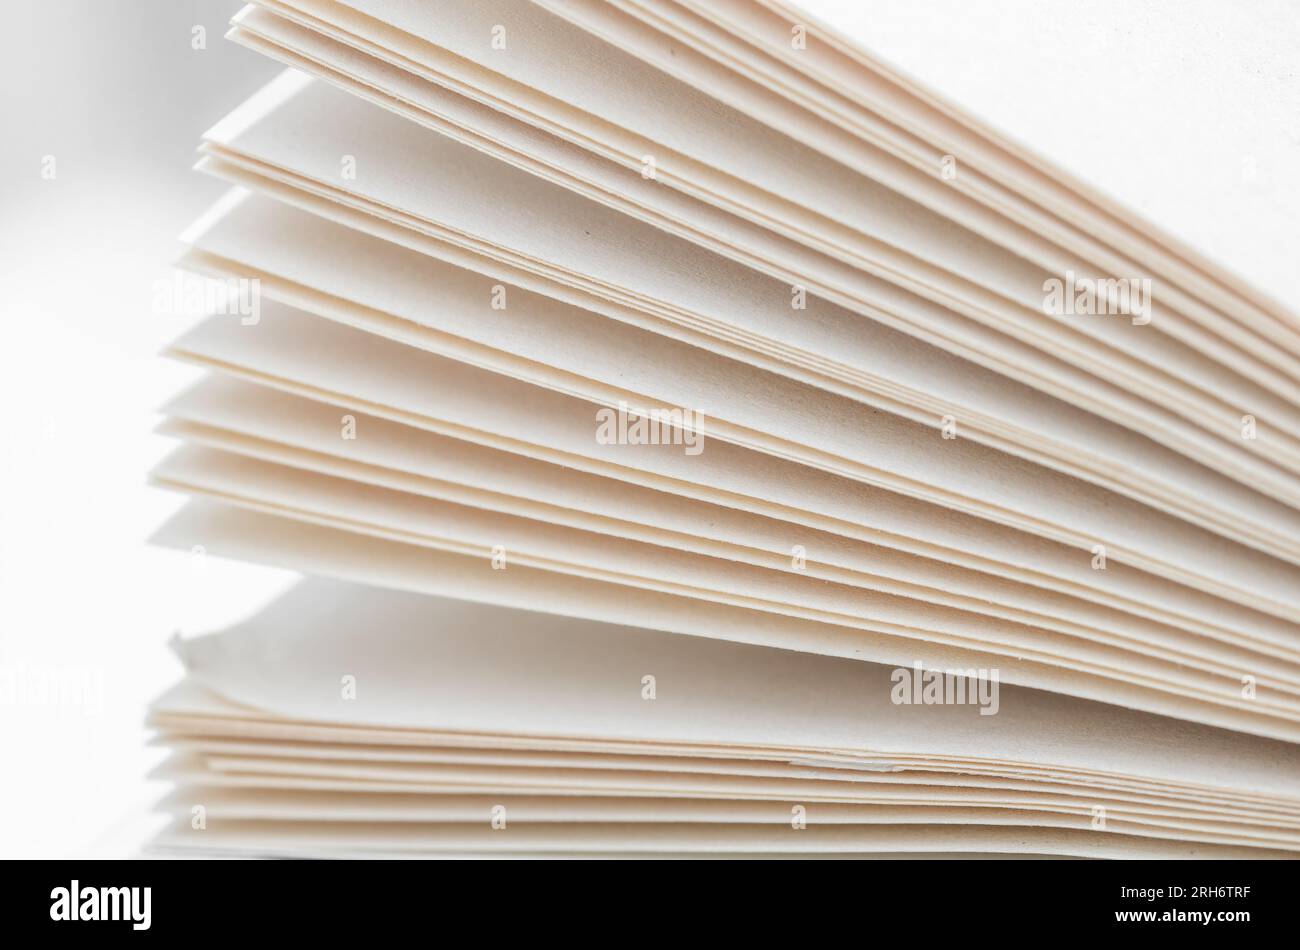 Bending stack of paper sheets, open magazine with copy space Stock Photo